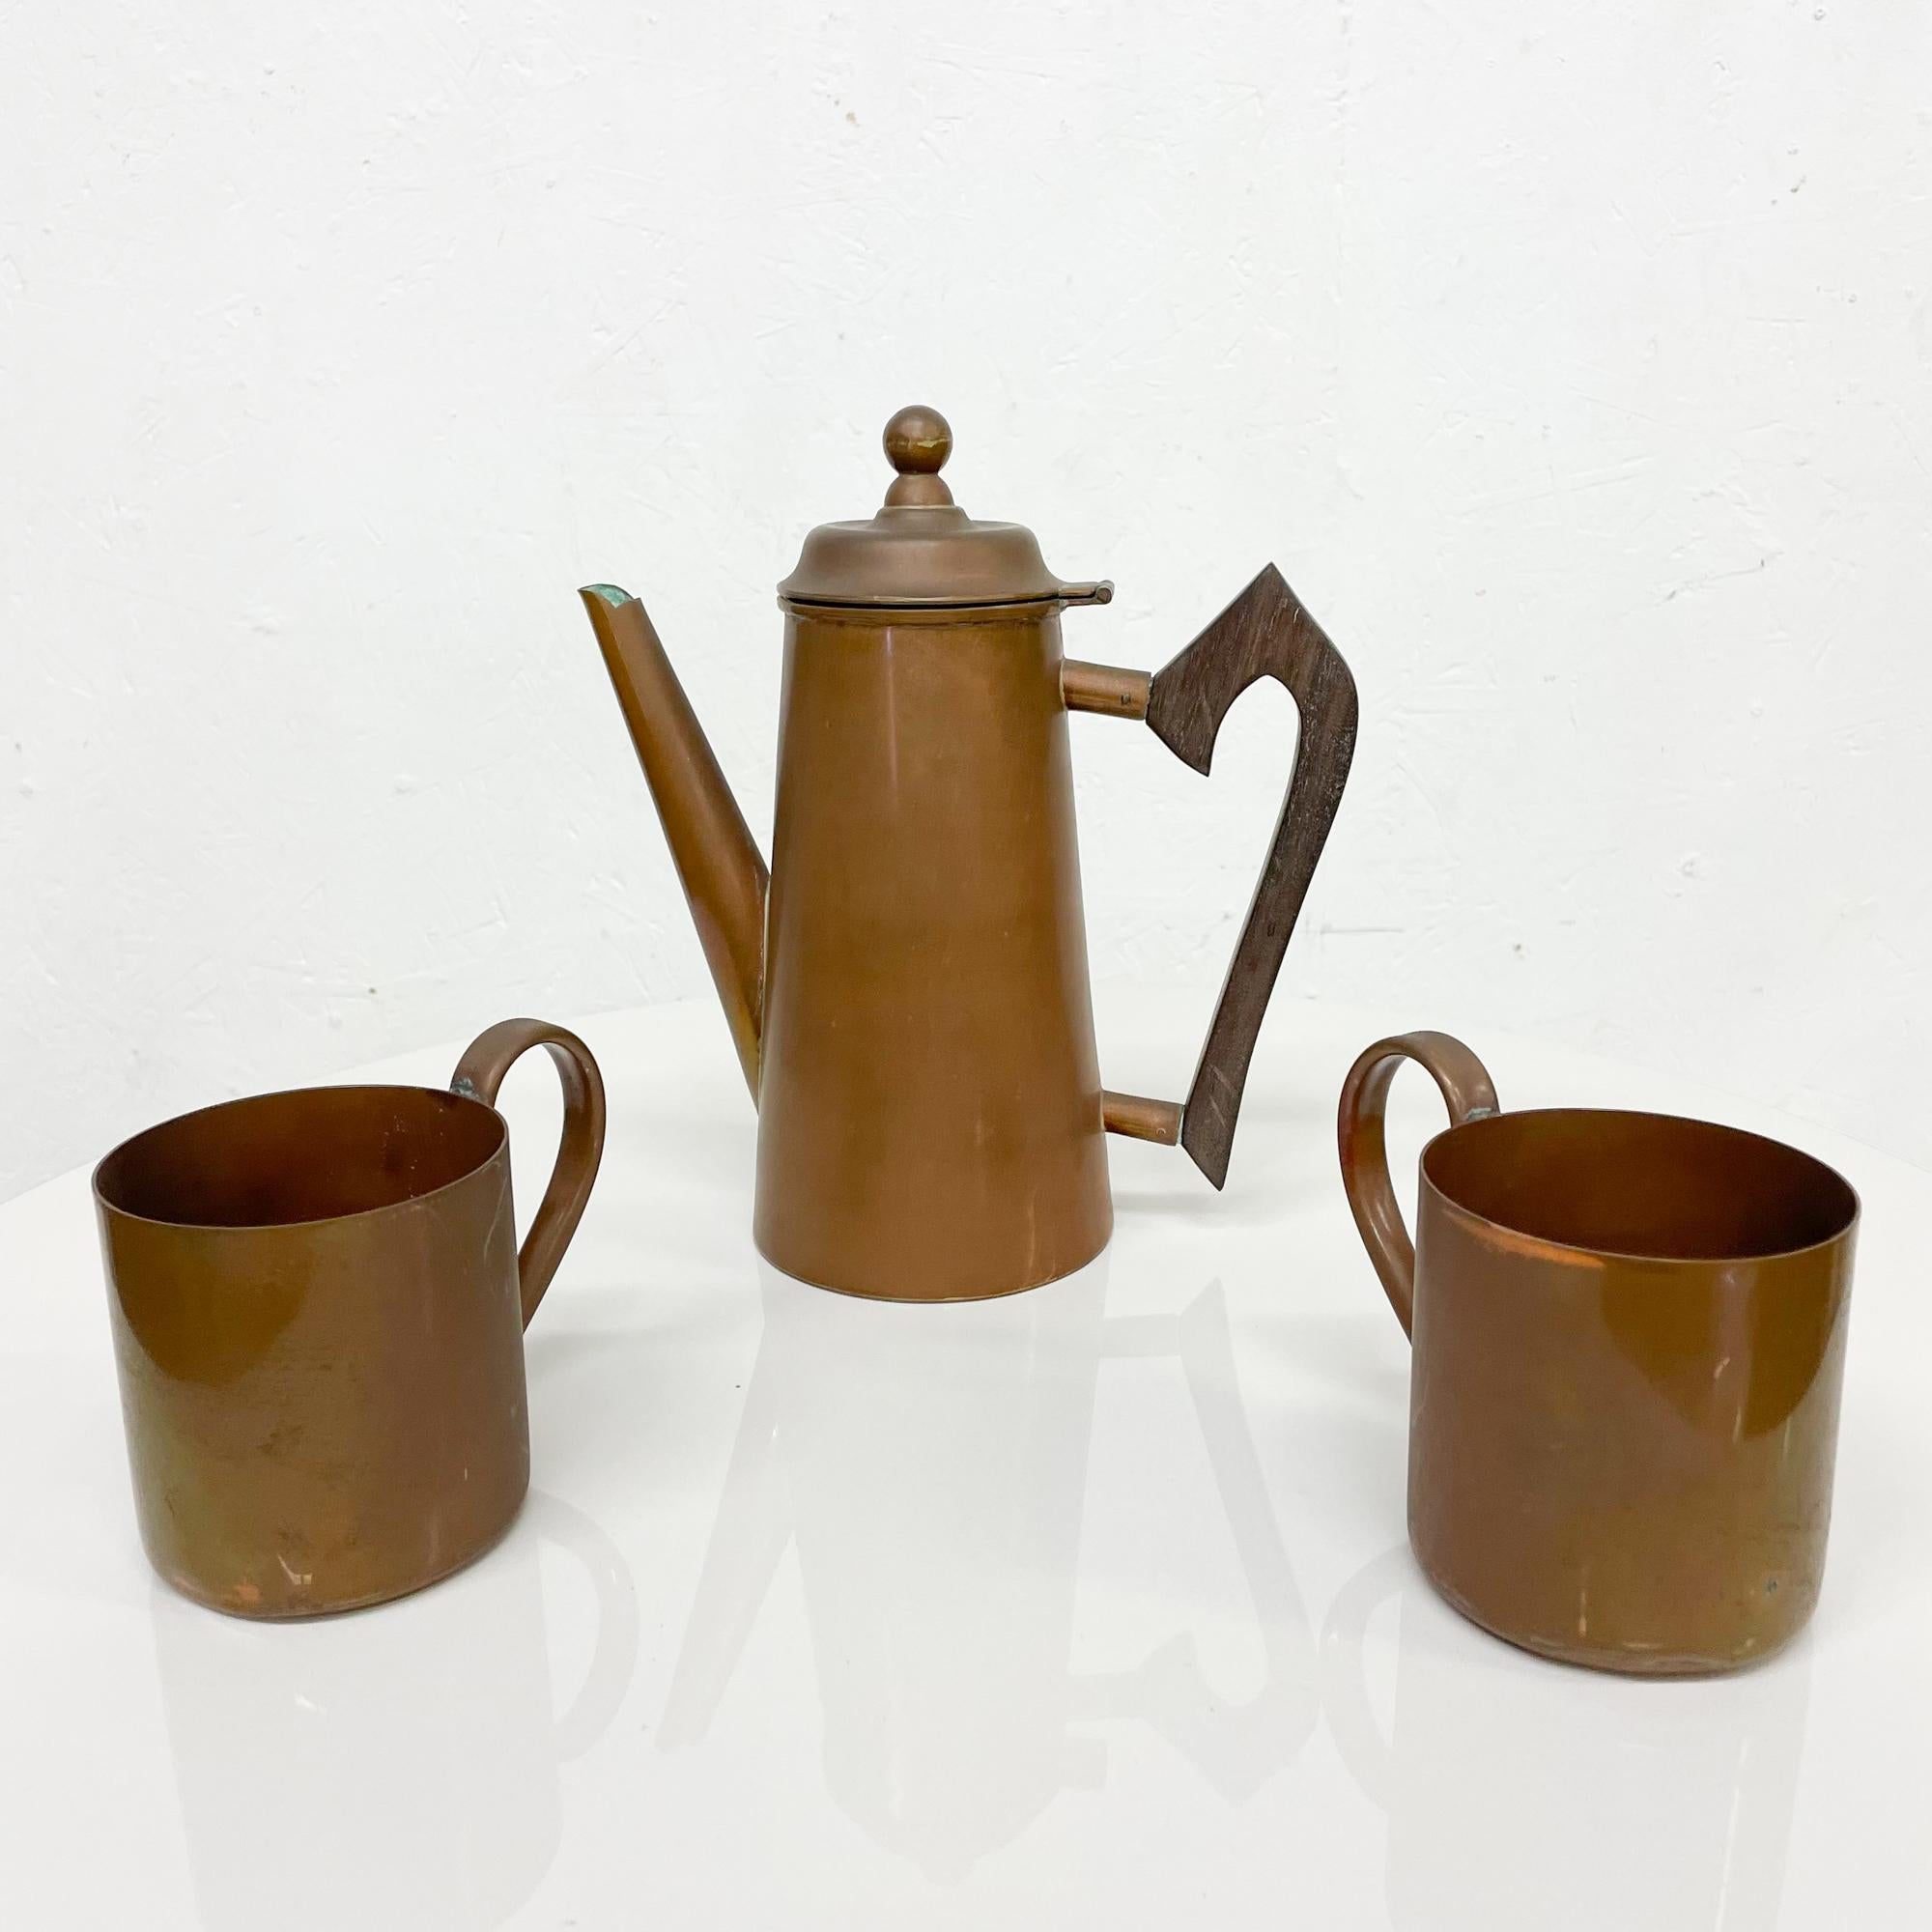 Coffee pot set
From Taxco 1950s Peggy Page Mexico stylish coffee pot solid copper includes 2 copper cups.
Coffee Pot is maker stamped Peggy Page Mexico. Cups are unmarked.
Delightful Sculptural Copper Coffee Pot with fancy wood handle.
Pot 8.75